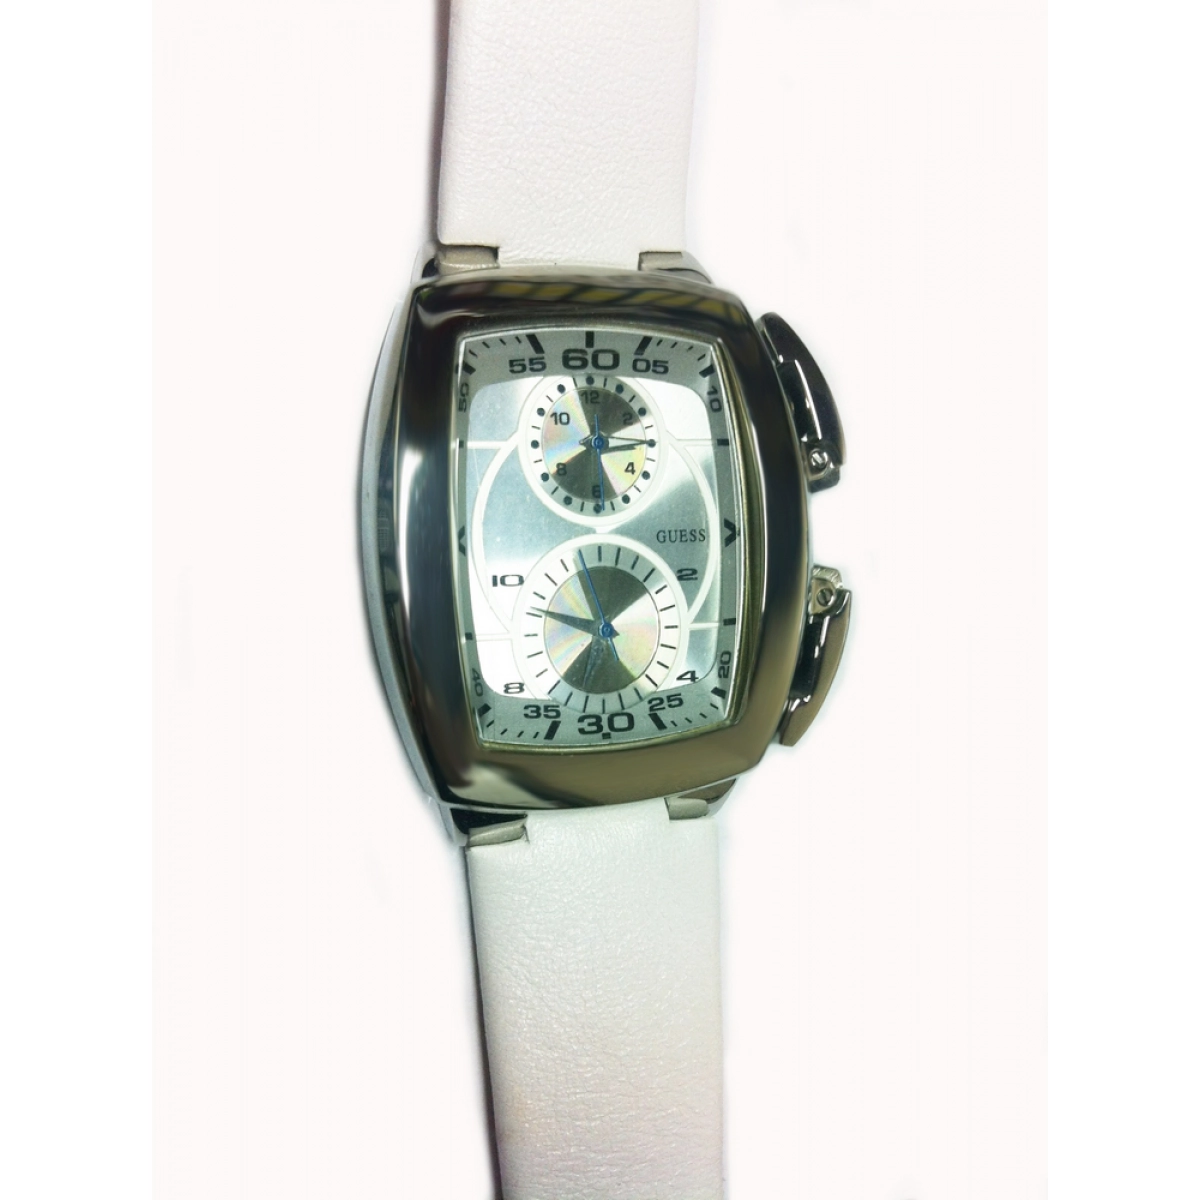 MONTRE GUESS GUY 3901